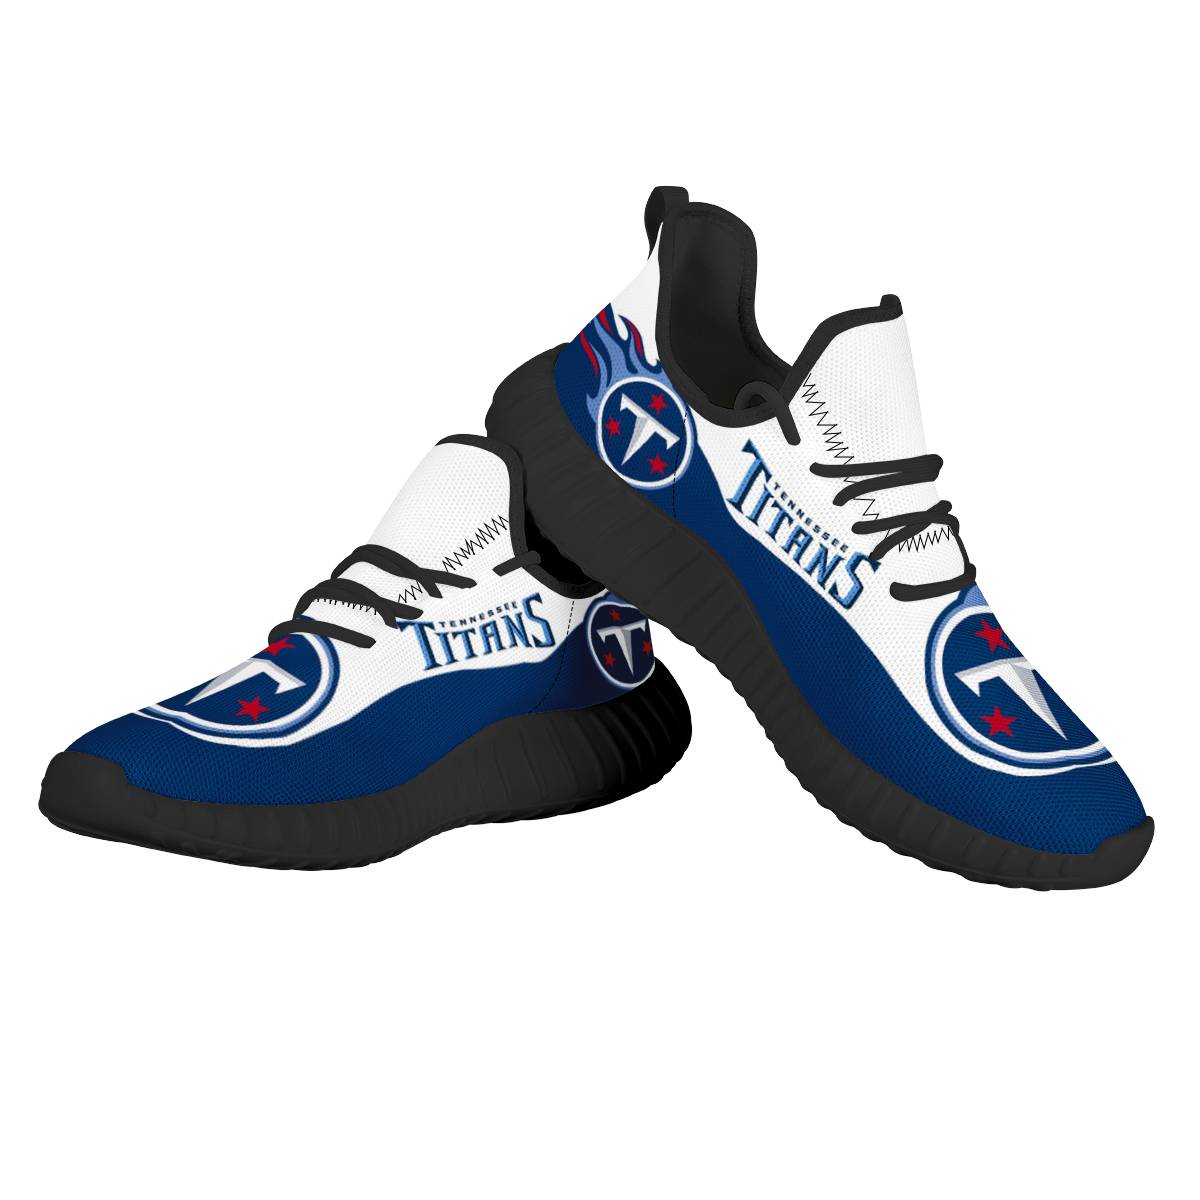 Women's NFL Tennessee Titans Mesh Knit Sneakers/Shoes 002